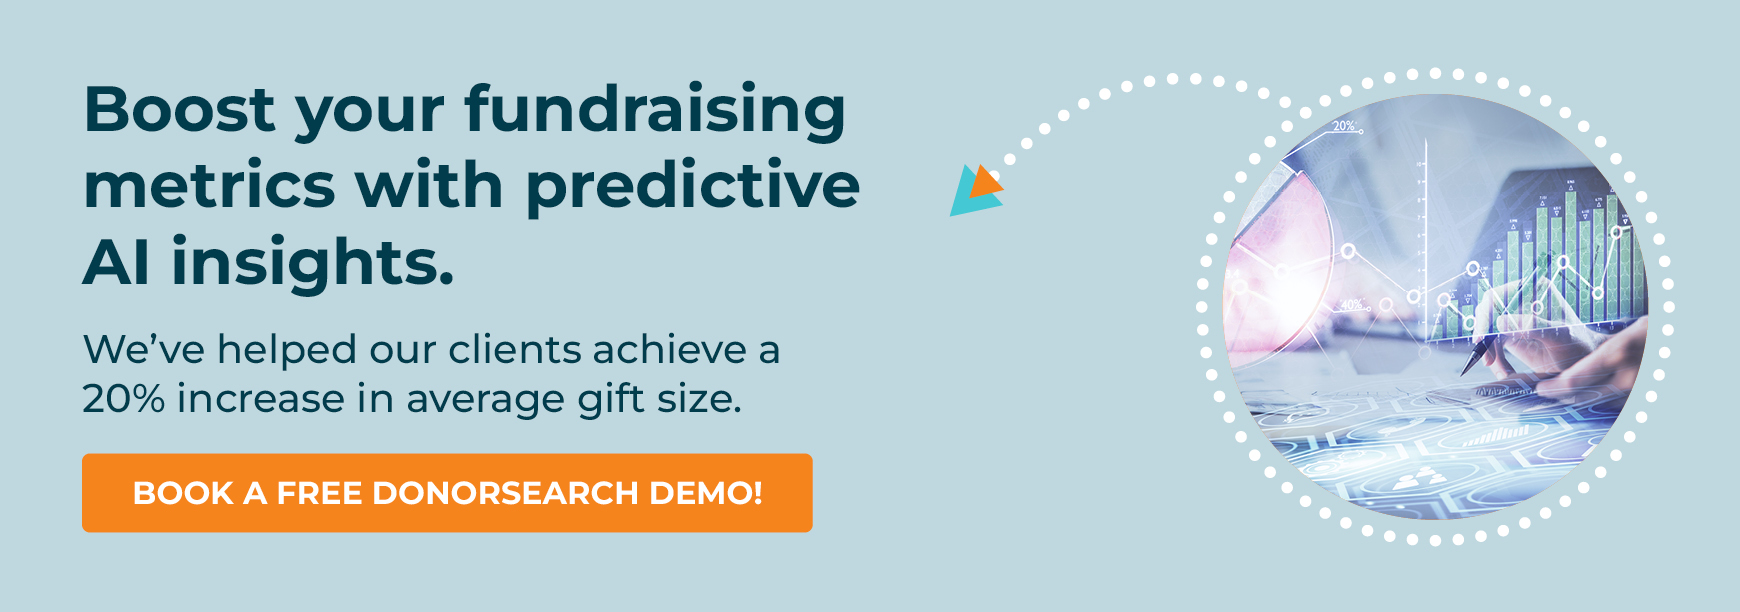 Get a free demo to learn how DonorSearch can help you improve your nonprofit fundraising metrics with predictive AI insights.